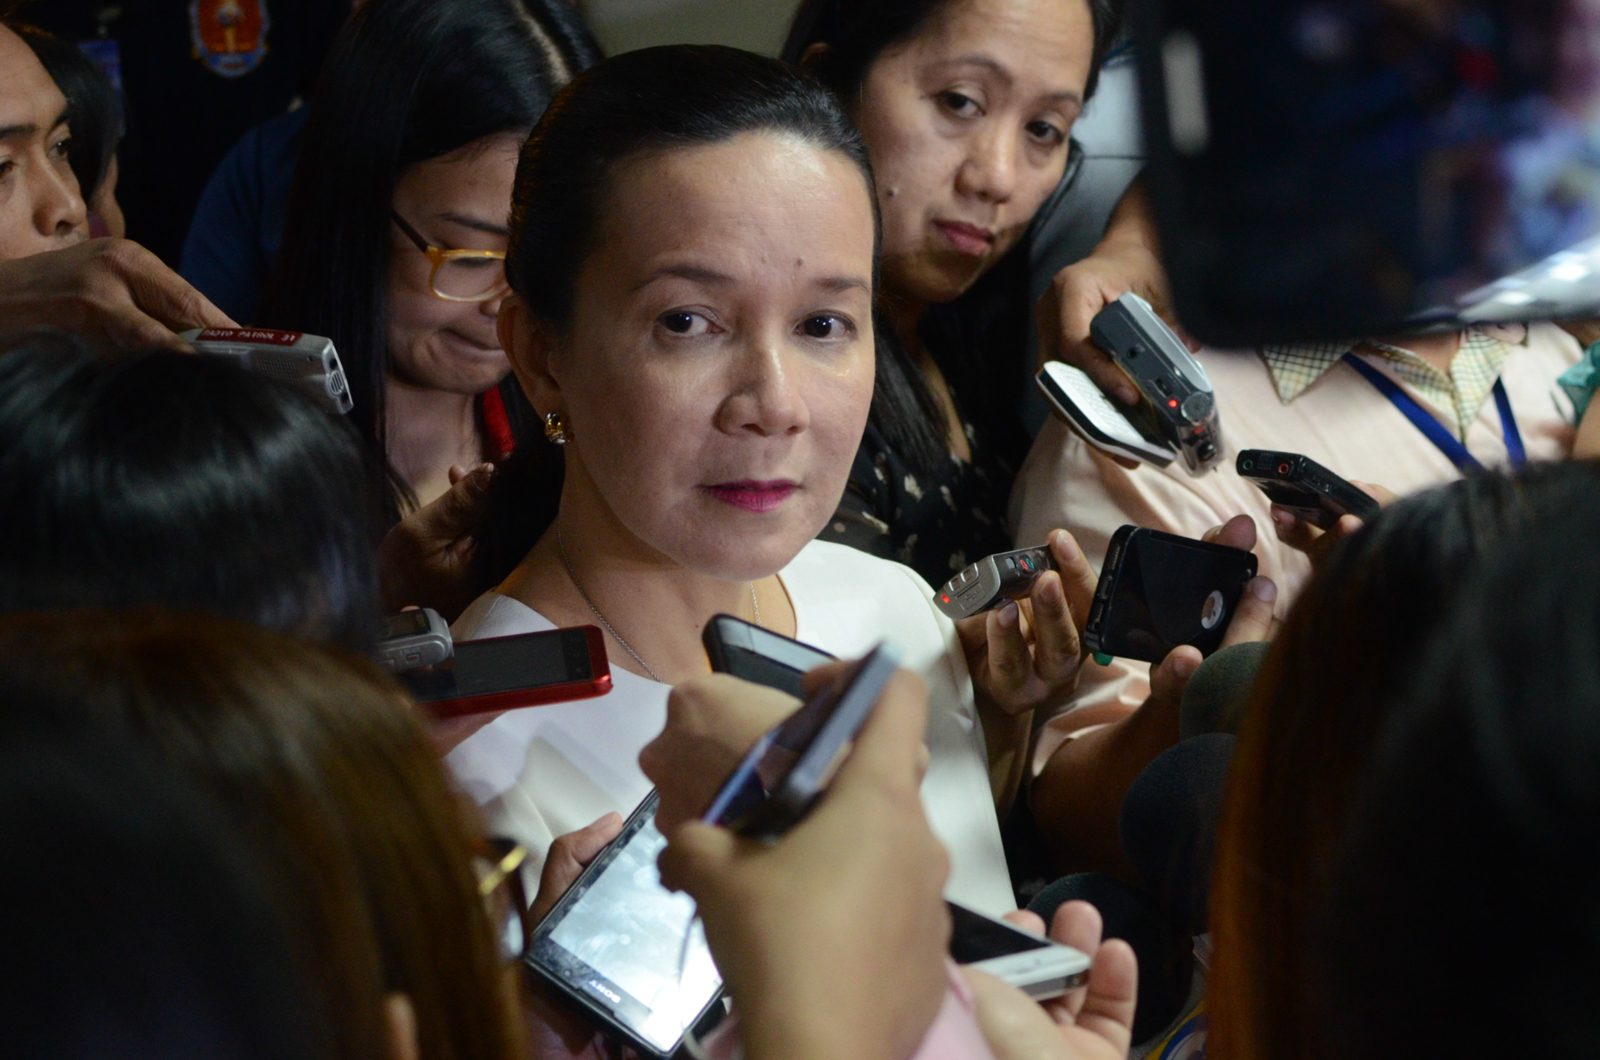 Part 2: Grace Poe and Pandora’s box: Legal issues also political